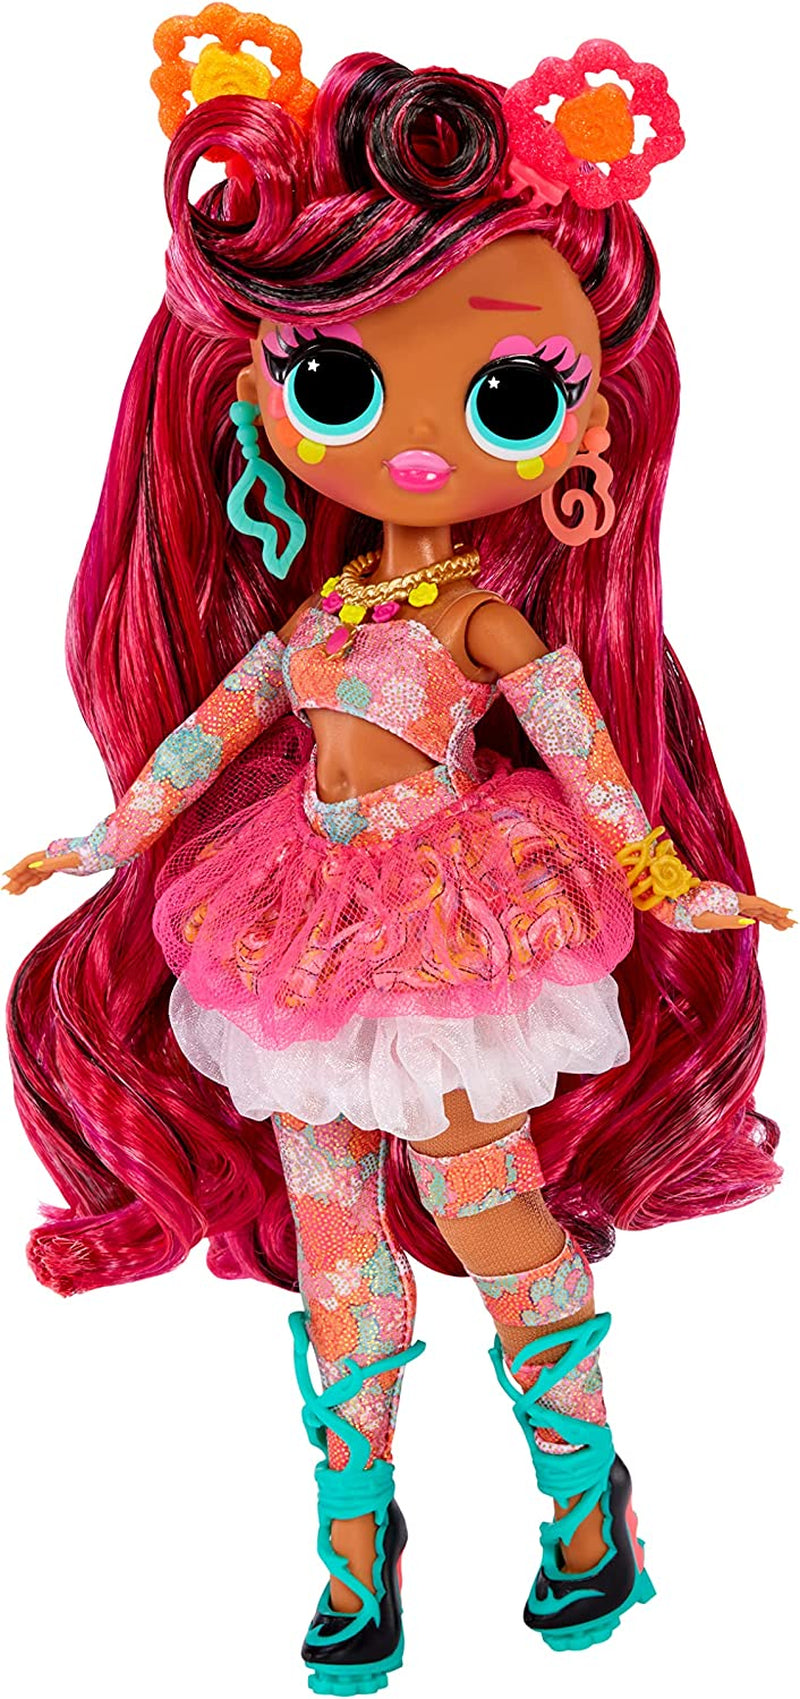 LOL OMG Queens Miss Divine Fashion Doll with 20 Surprises Including Outfit and Accessories for Fashion Toy, Girls Ages 3 and Up, 10-Inch Doll Sporting Goods > Outdoor Recreation > Winter Sports & Activities MGA Entertainment   